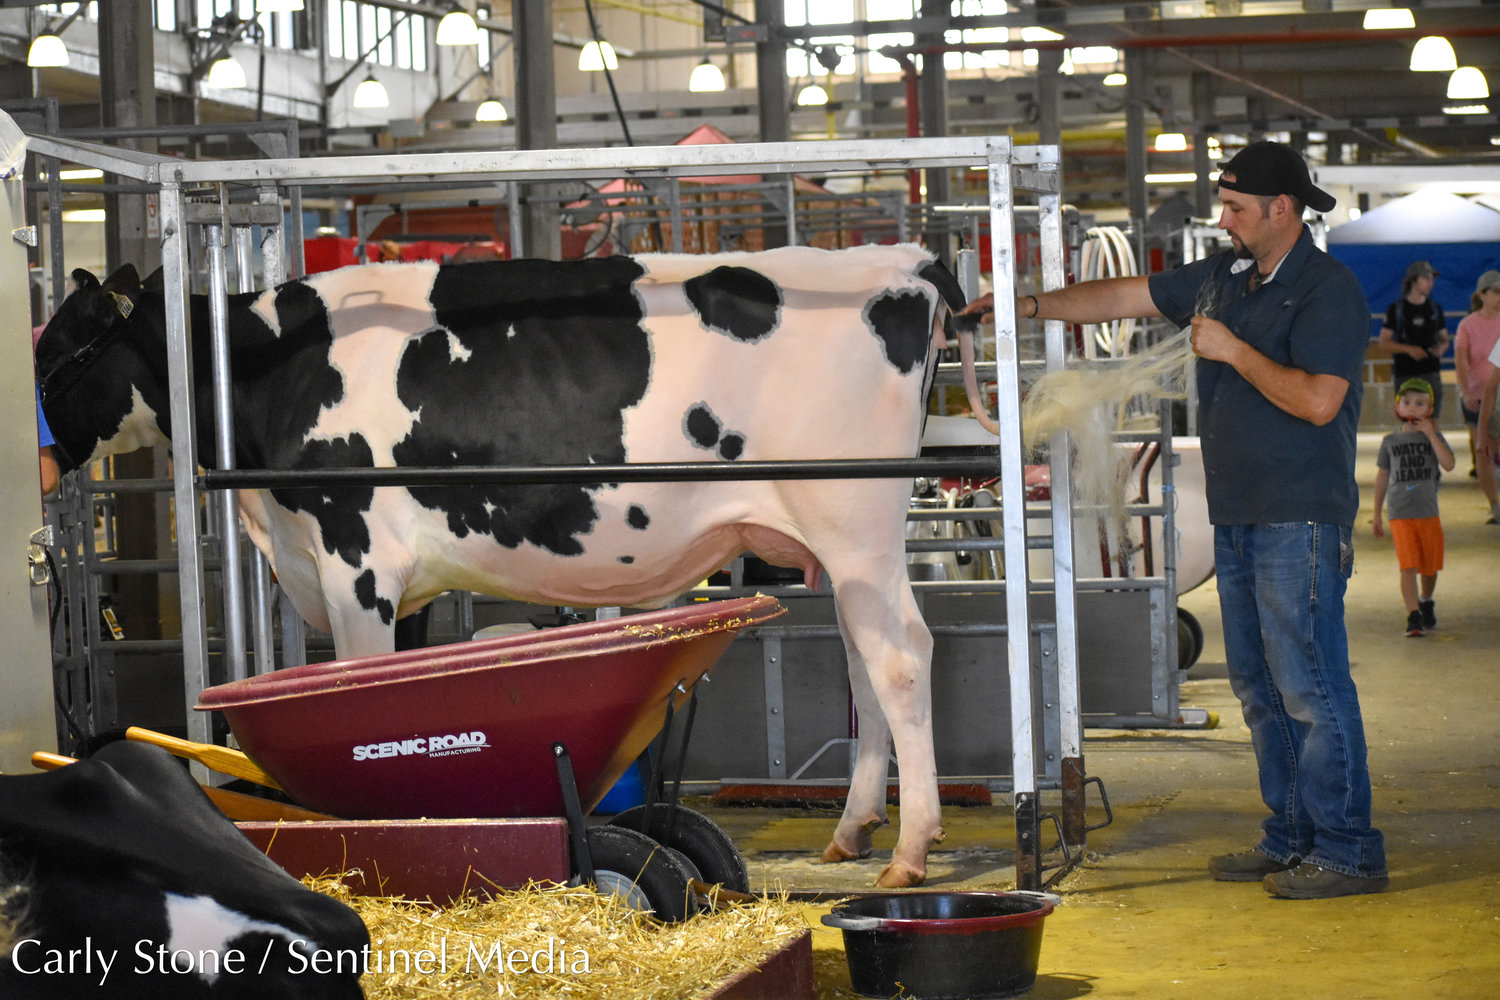 A cow gets a cleaning in the dairy cattle building at the NYS Fair.